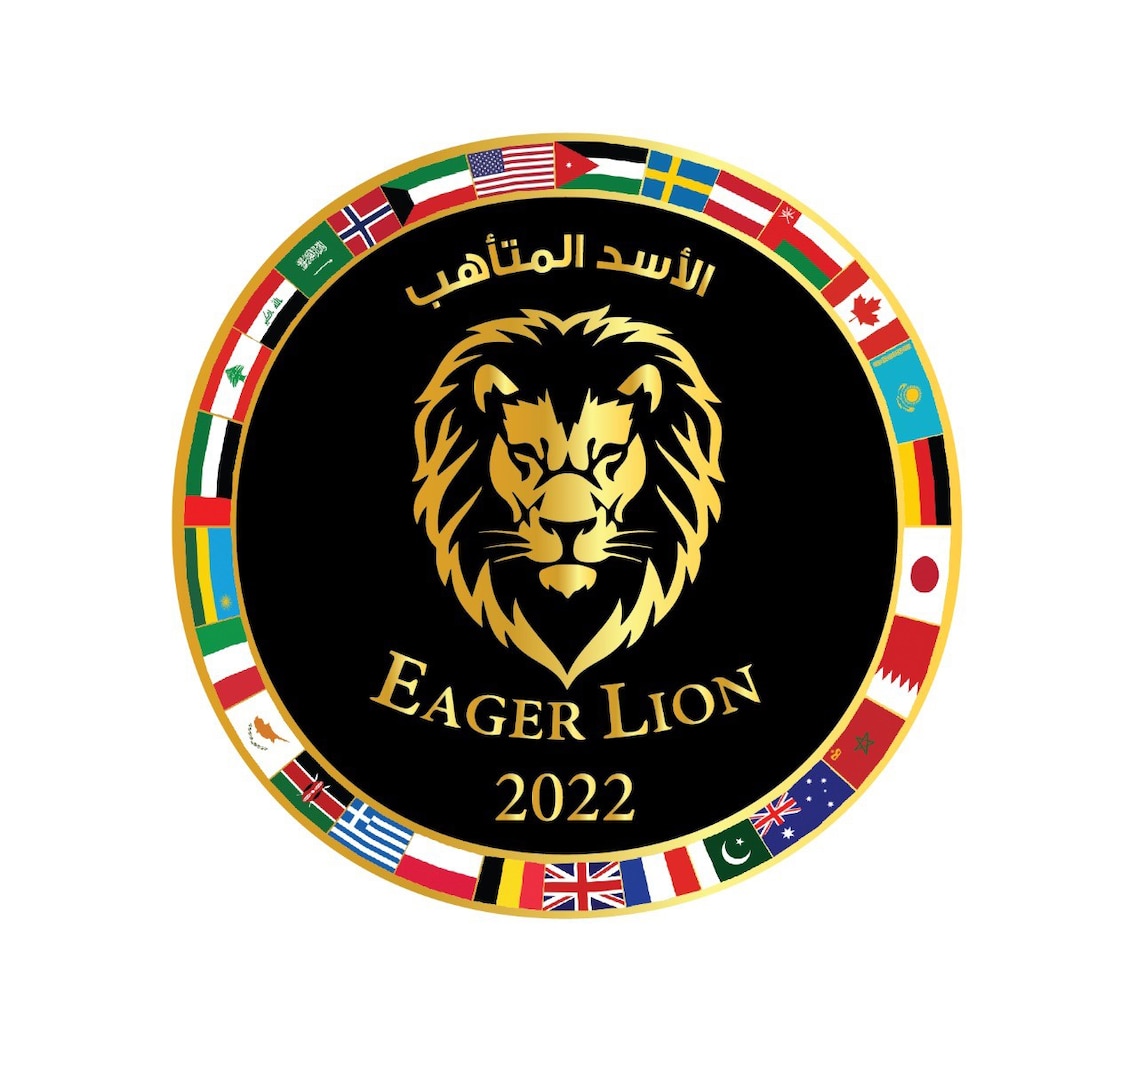 The United States, Jordan, and 28 partner nations opened the two-week Exercise Eager Lion today in Jordan. Eager Lion, held September 4-15, 2022, represents one of the largest military exercises in the region, and is designed to exchange military expertise and improve interoperability among partner nations.